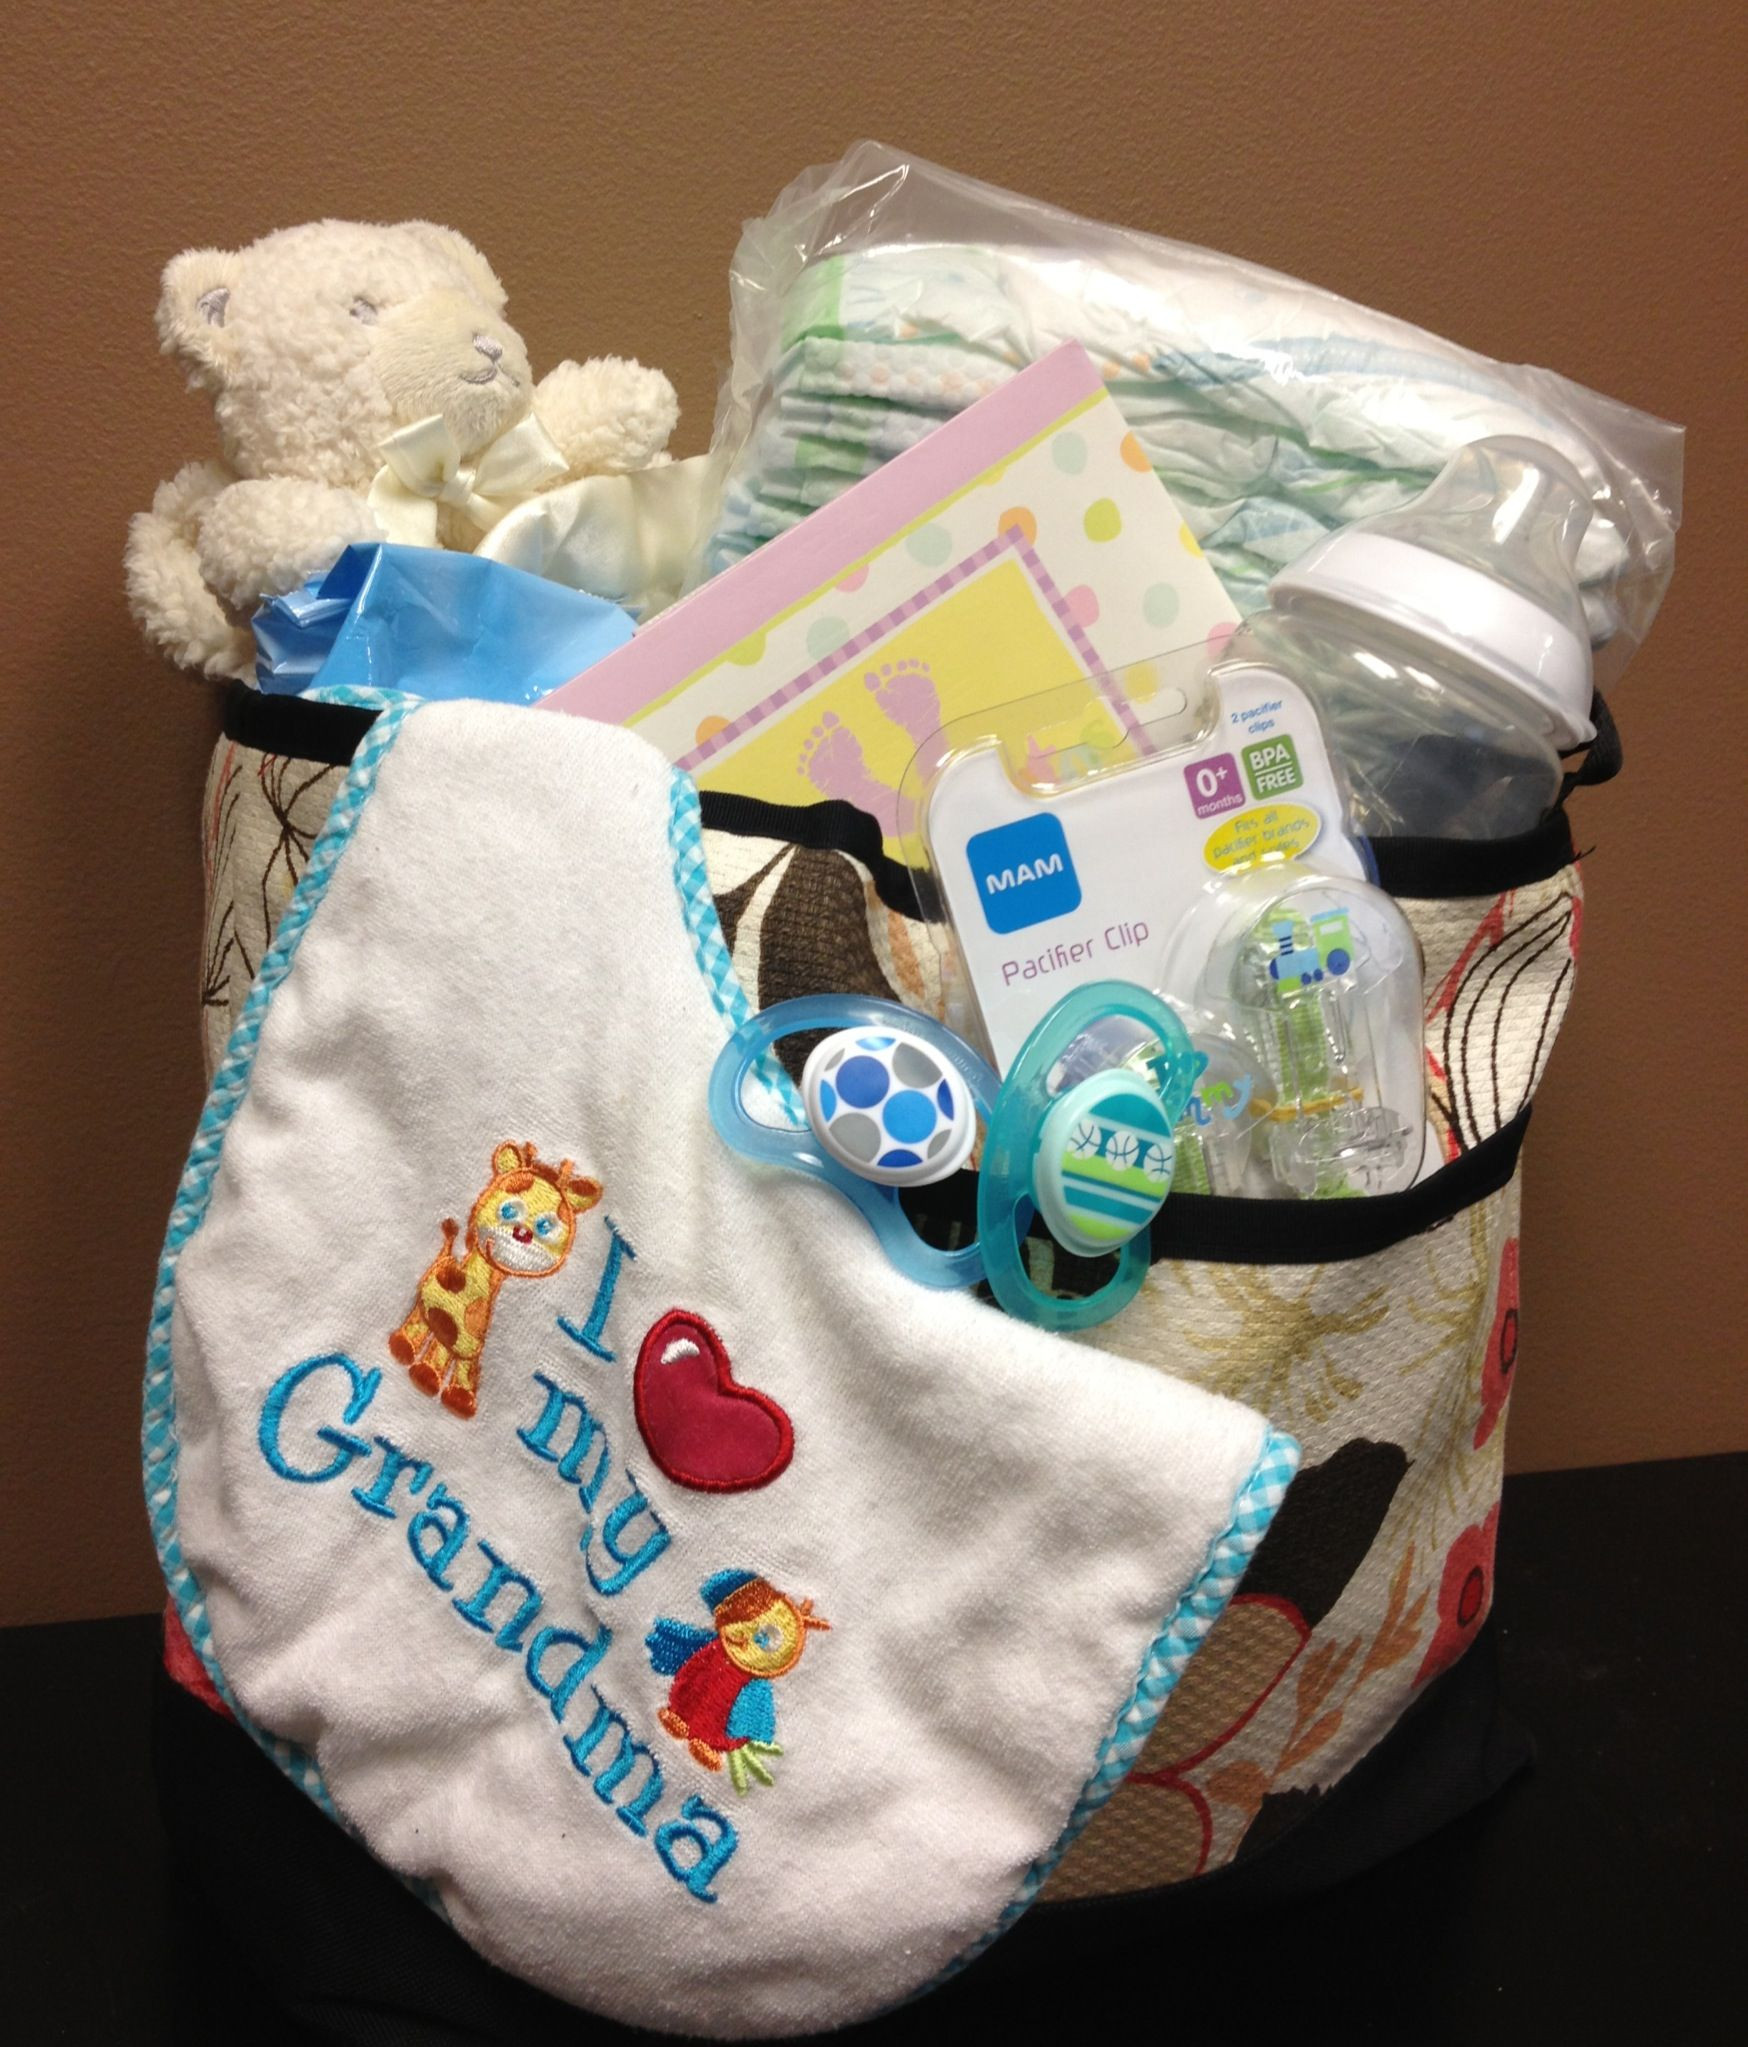 Grandma Baby Shower Gift Ideas
 Check out these great t ideas for Grandma to be … or